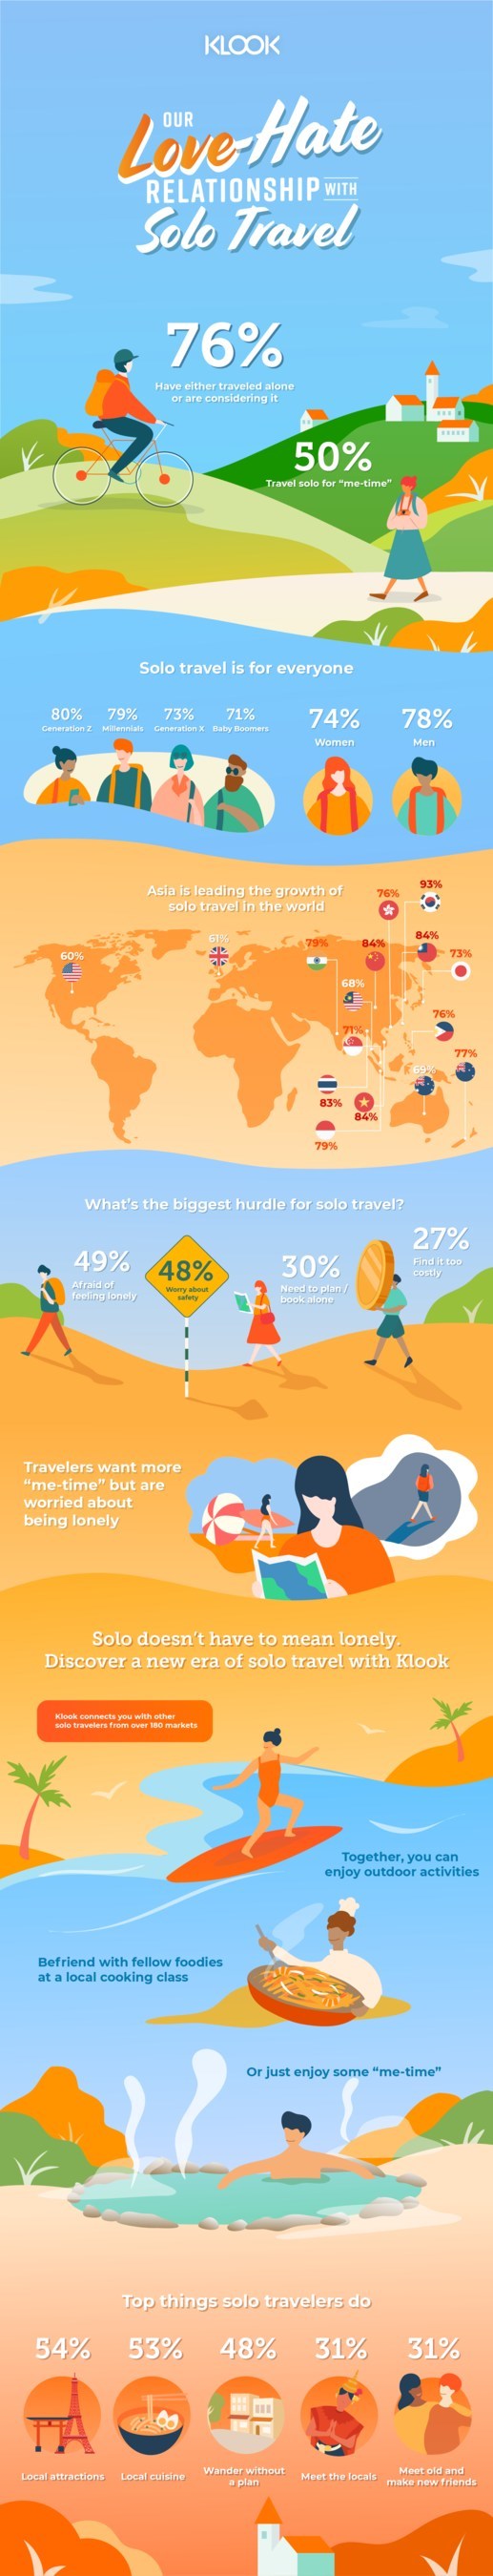 Infographic for Klook’s Solo Travel survey